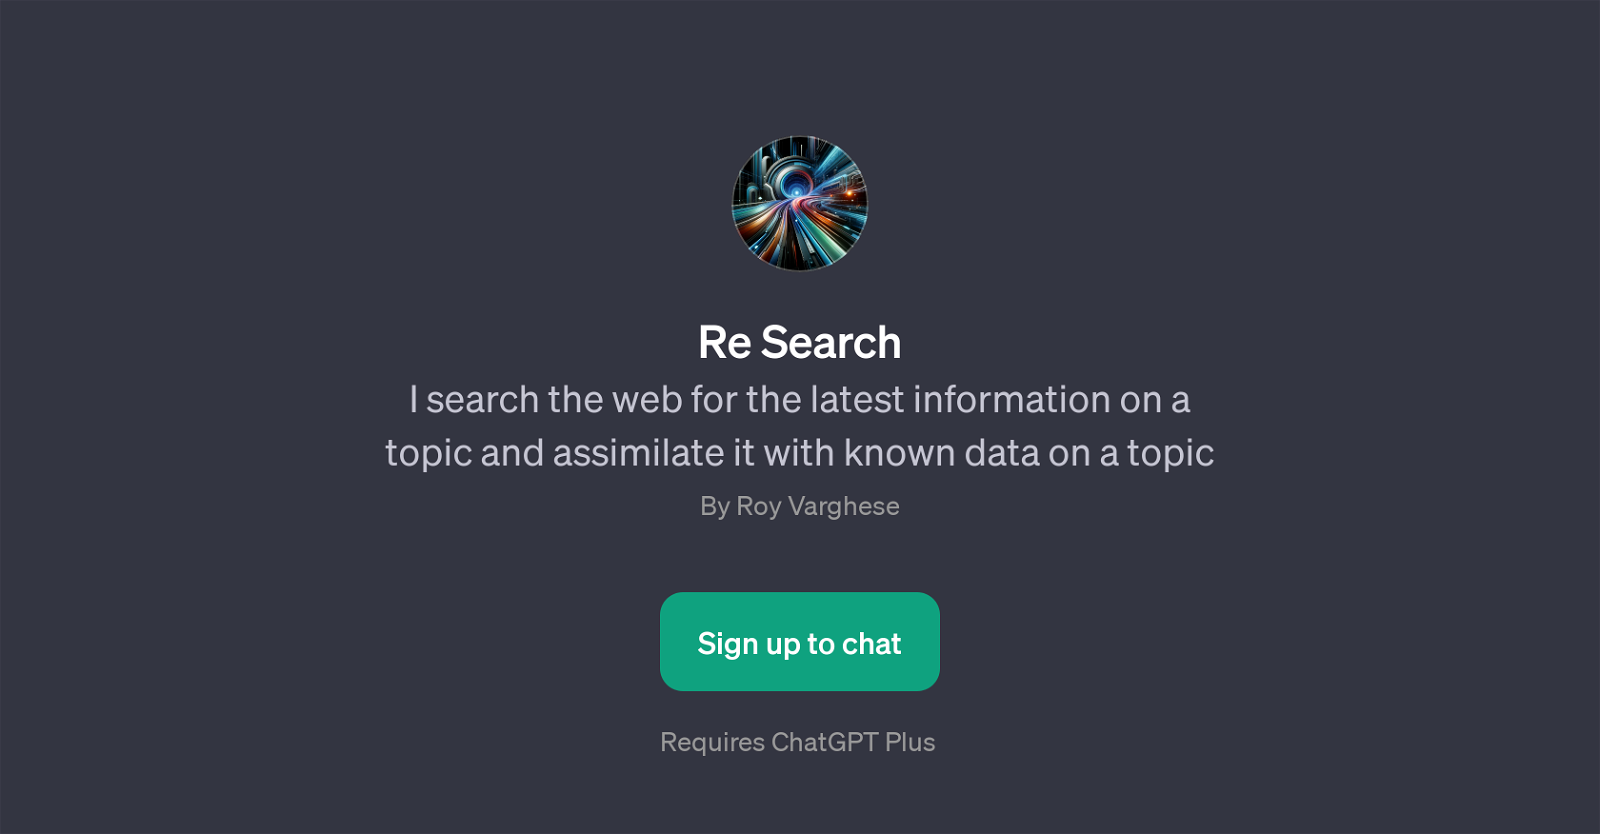 Re Search website